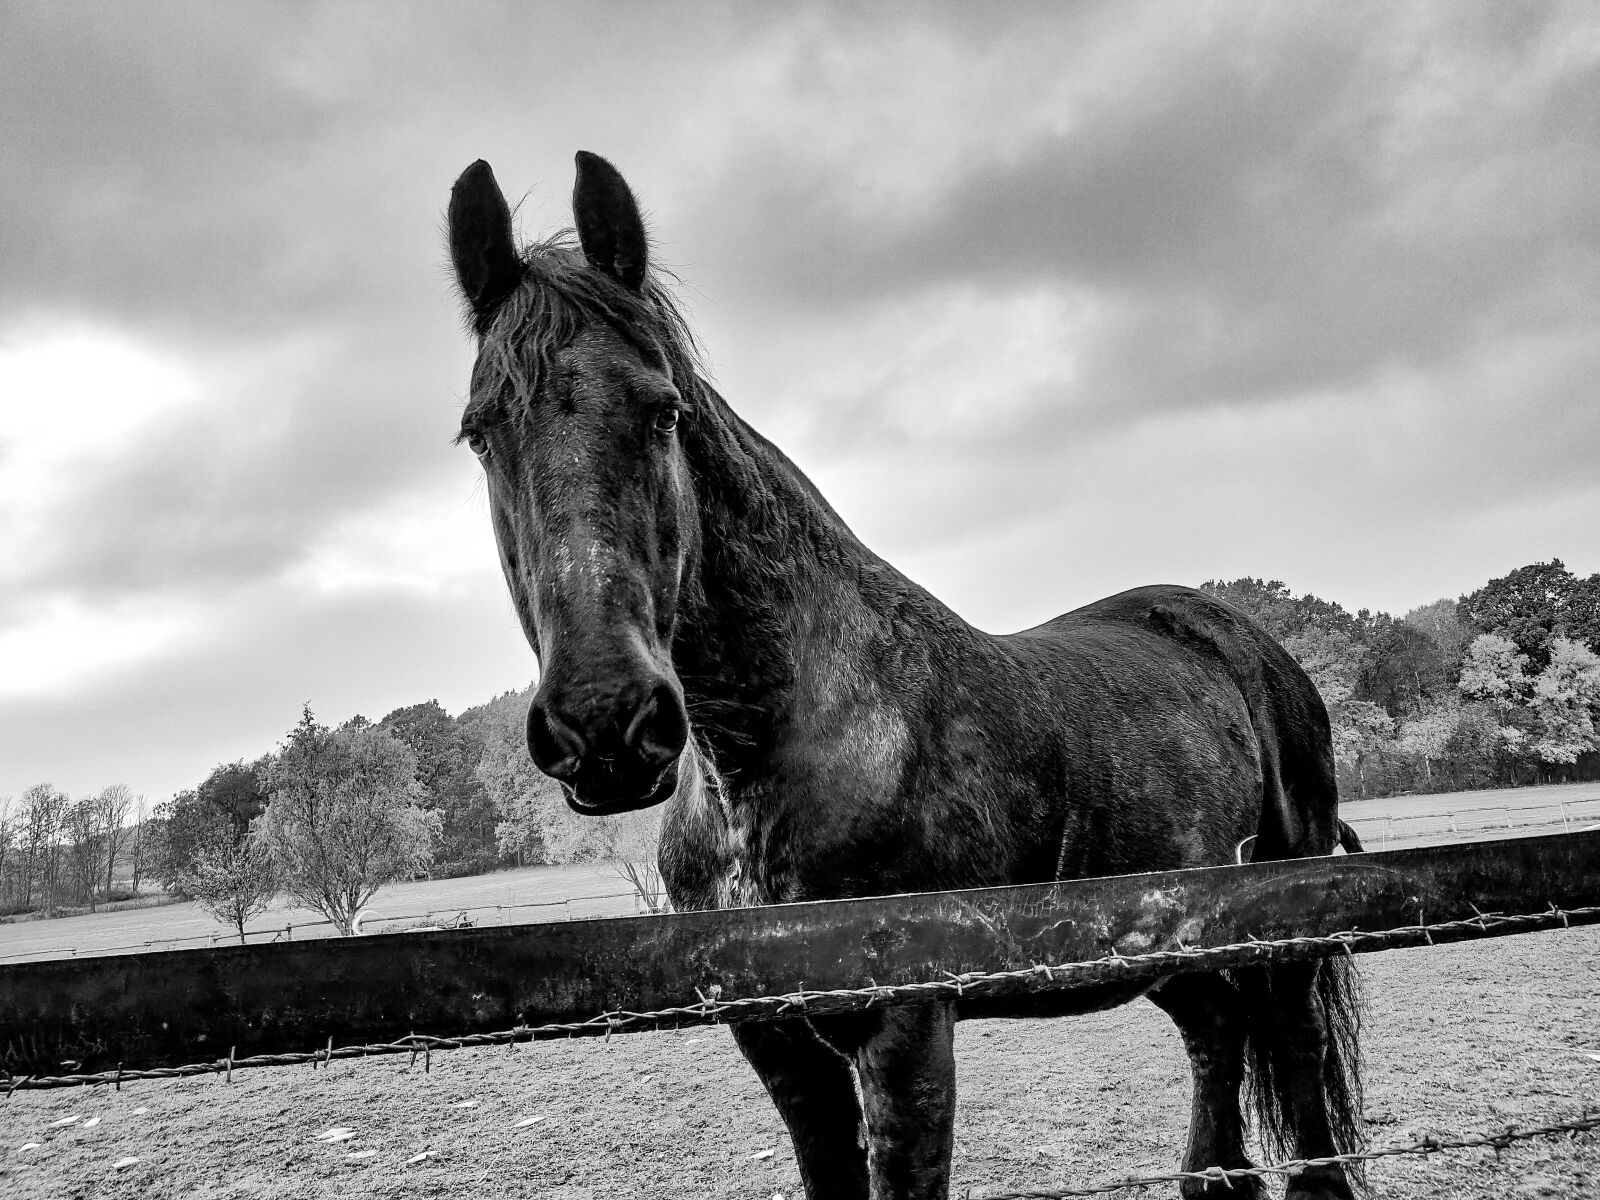 OnePlus 6T sample photo. Horse, nature, rural photography